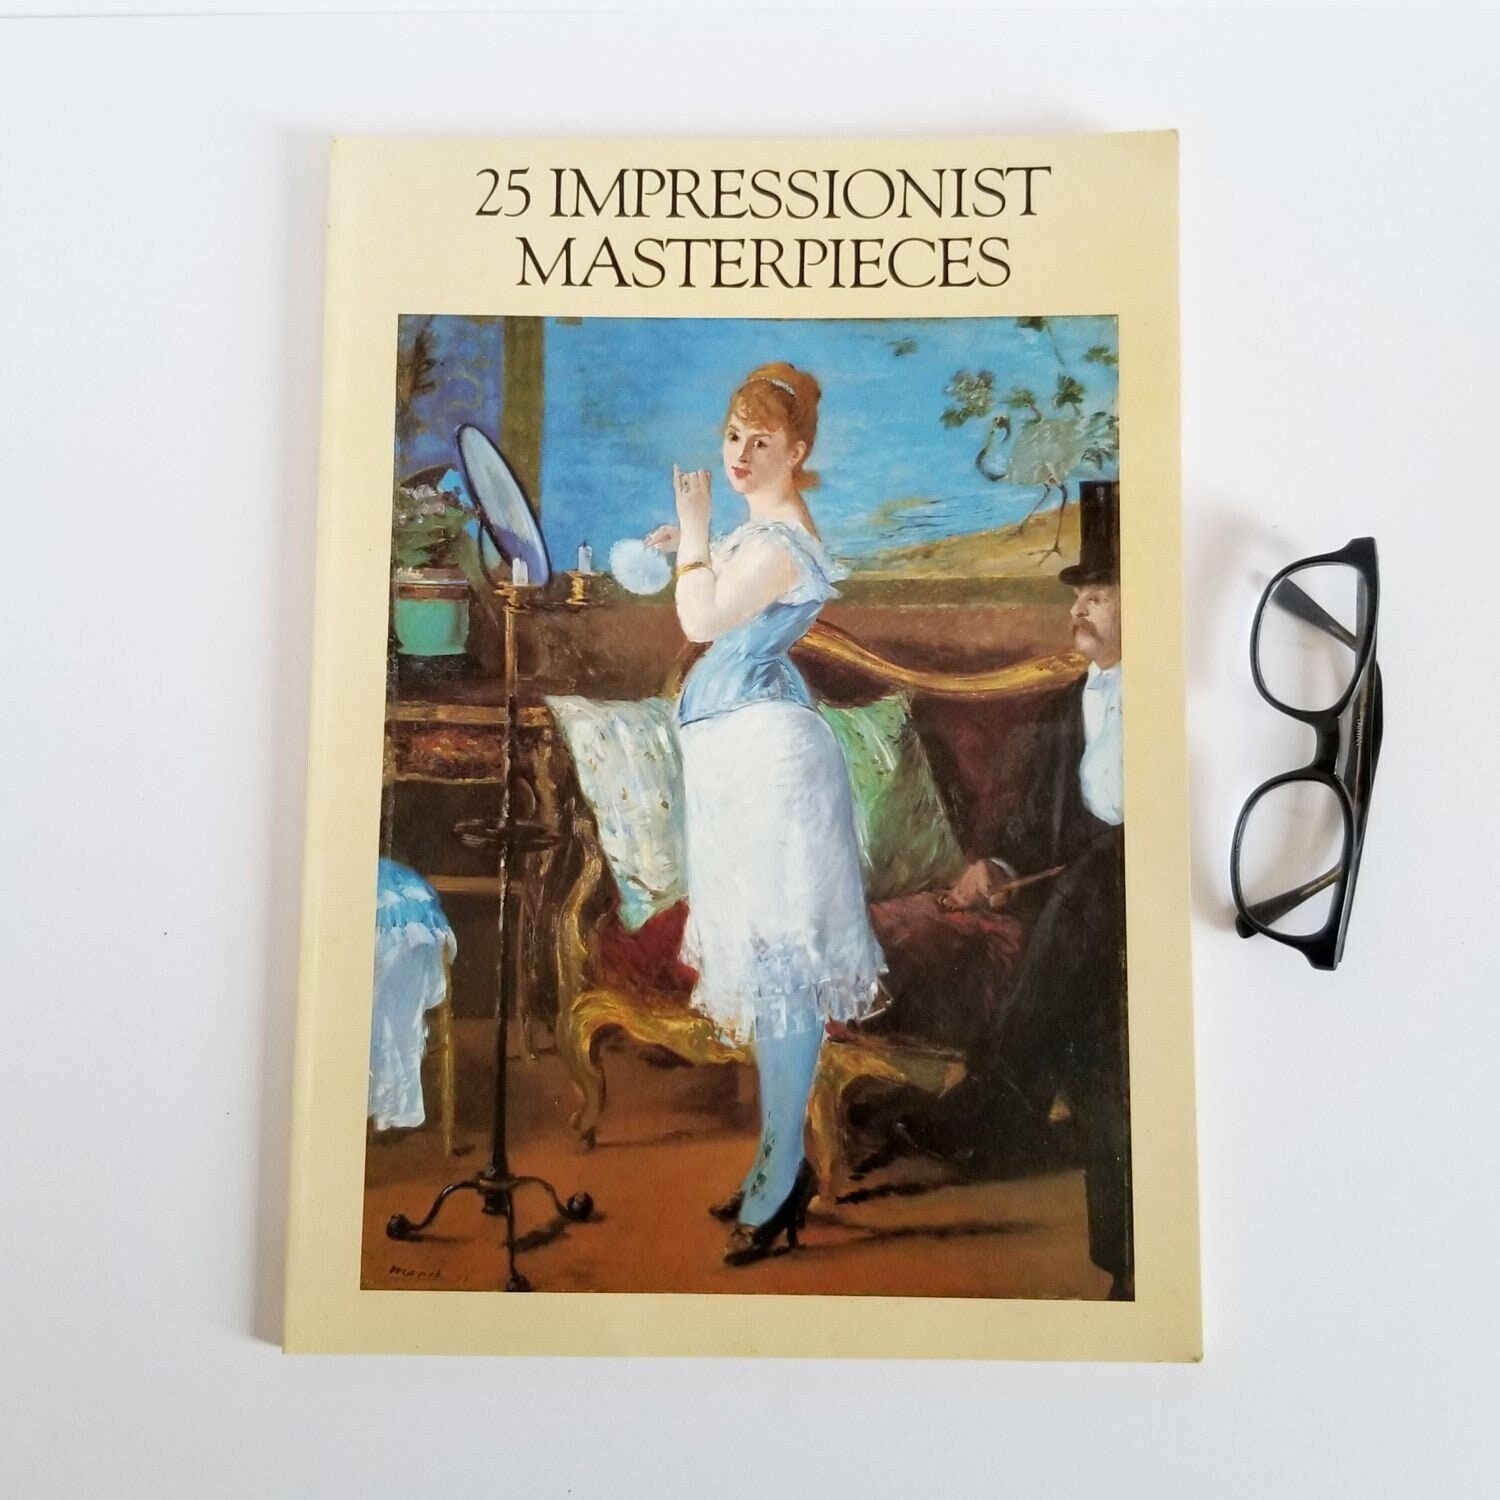 Painting Book Illustrated Colour Art Book Hardcover Picture Book  Renaissance Vintage Artists Books Gift 